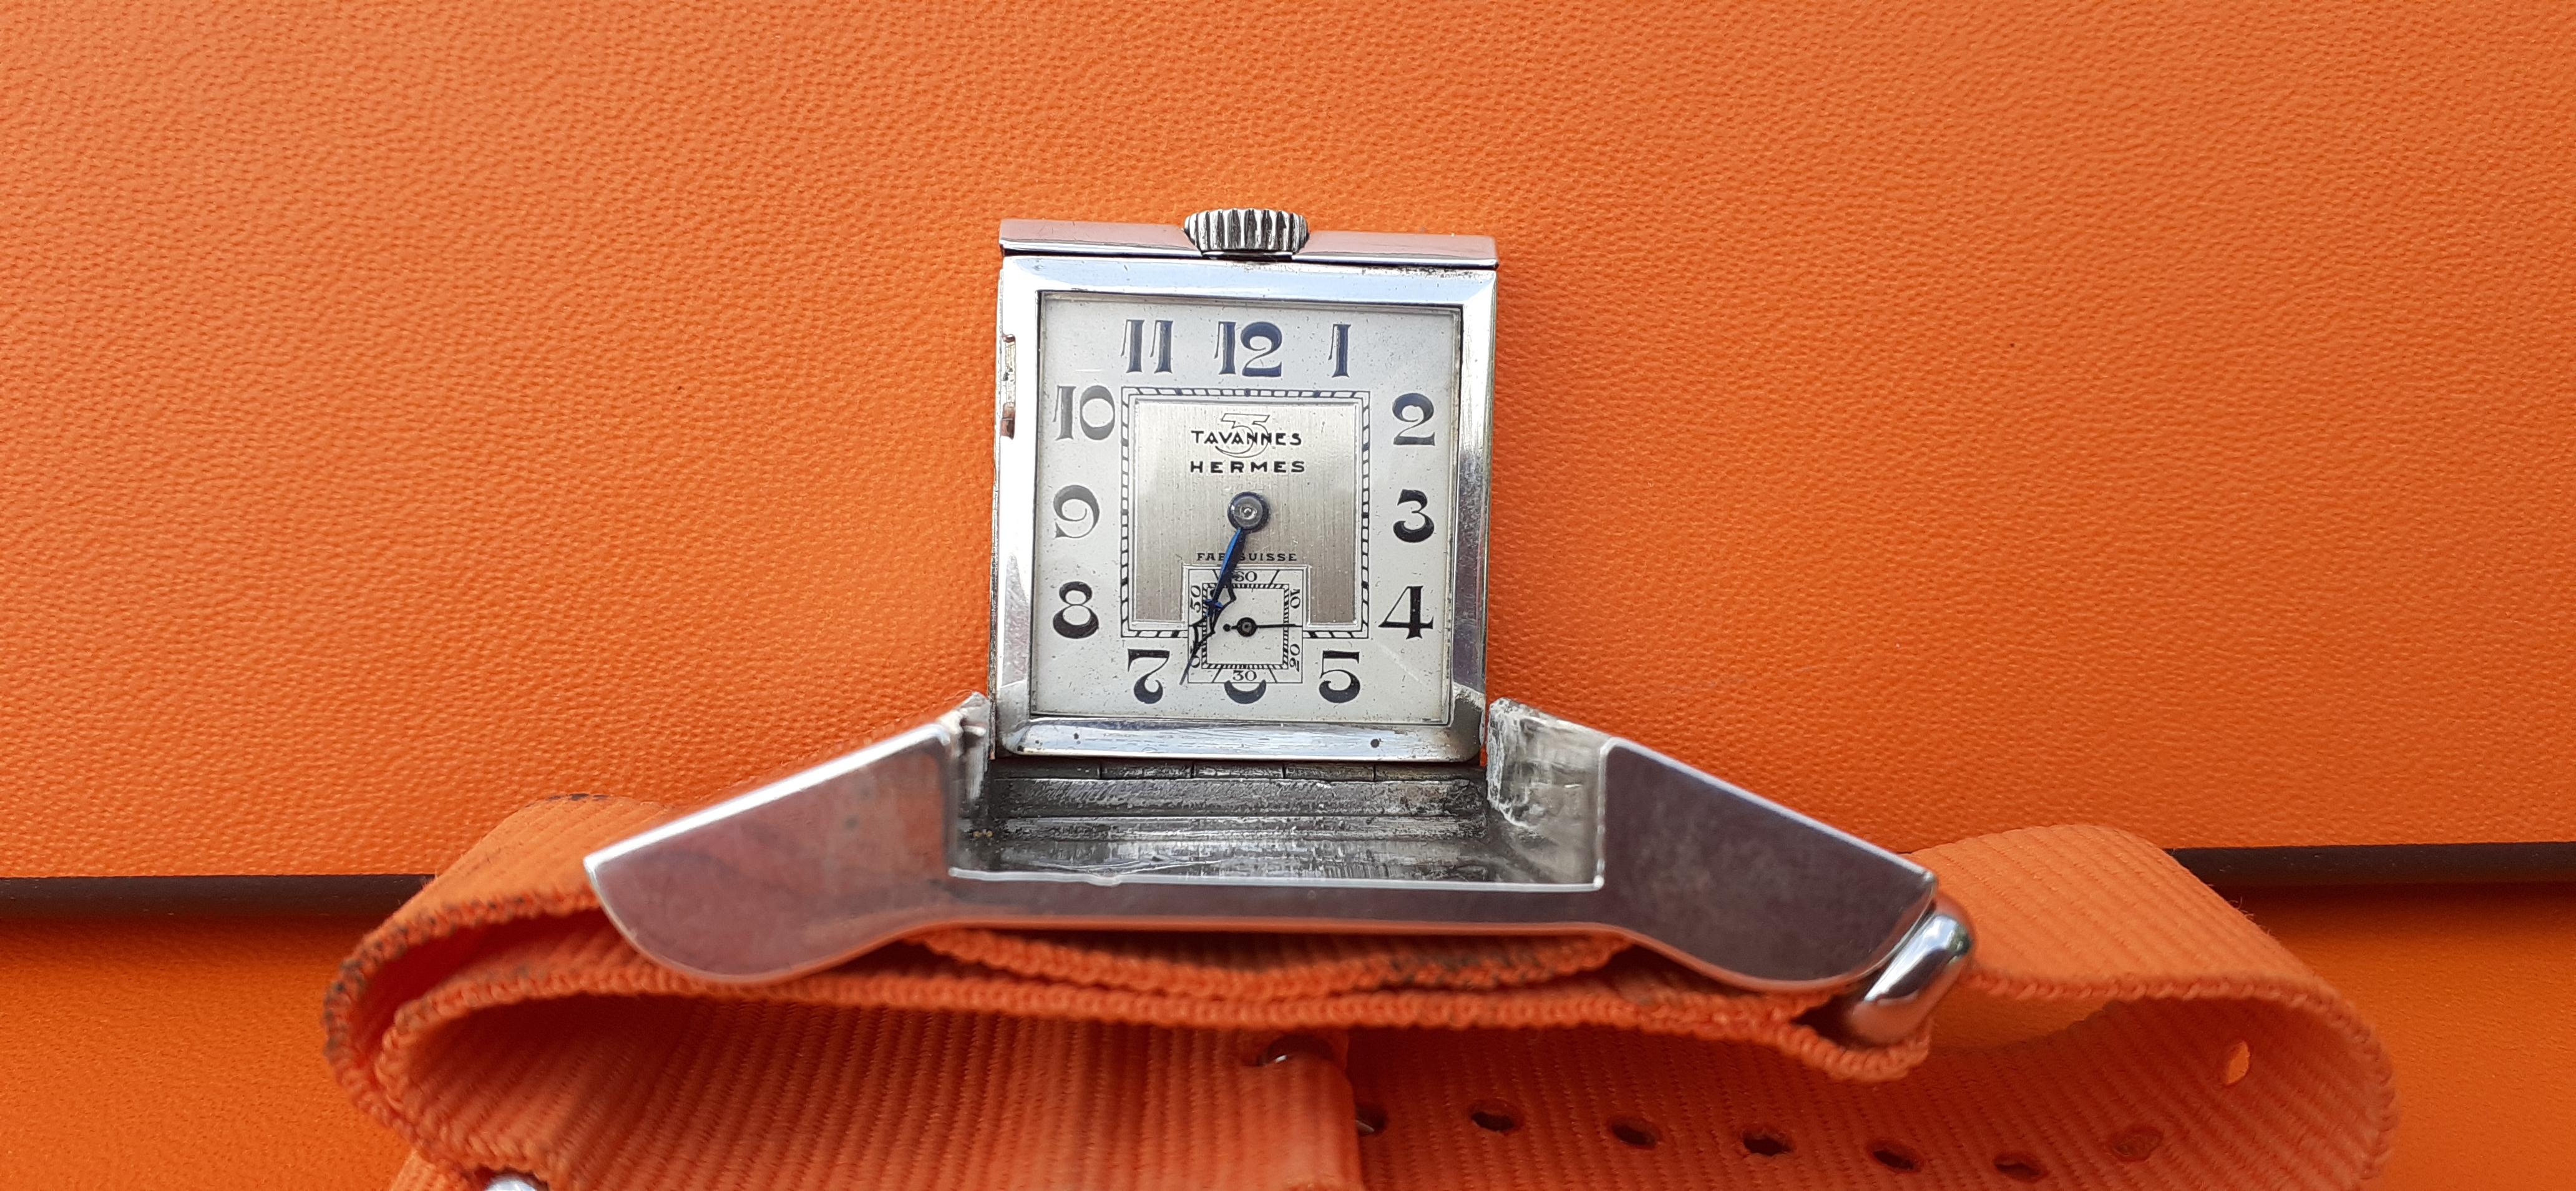 This is a rare opportunity to get an authentic Tavannes Golf Watch

Made for Hermès

IN WORKING CONDITION

Unusual, fine, this is a true gem for Golf Lovers

Created for golfers, designed to be worn on the belt

This one will come to you with a